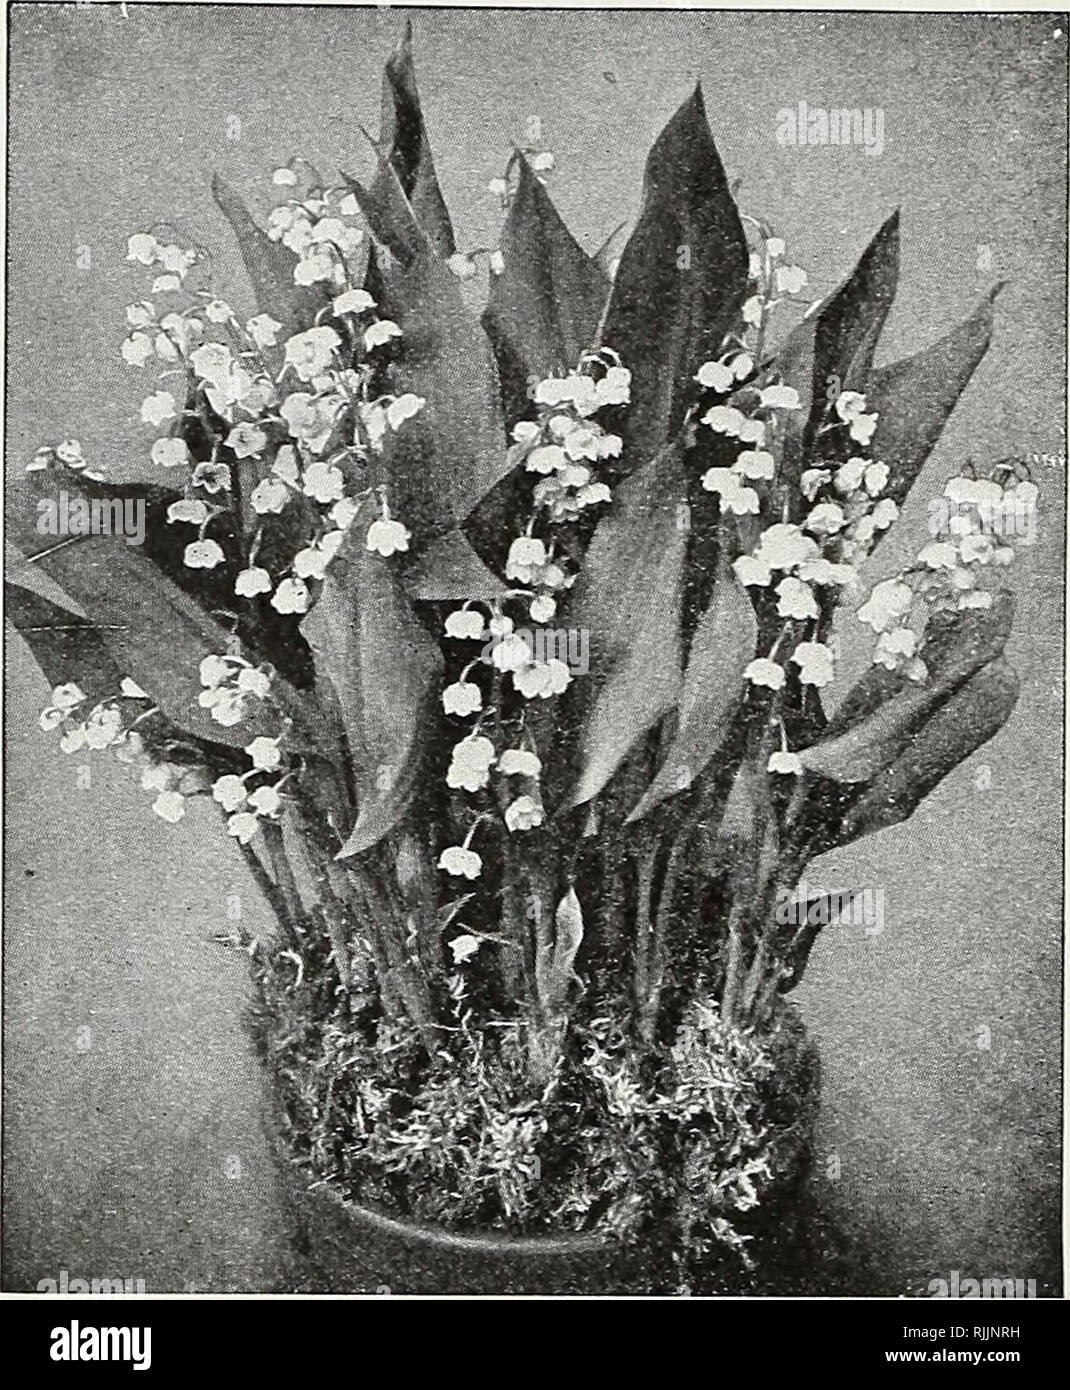 . Beckert's bulb catalogue. Nurseries (Horticulture) Pennsylvania Pittsburgh Catalogs; Nursery stock Pennsylvania Pittsburgh Catalogs; Flowers Seeds Pennsylvania Pittsburgh Catalogs; Bulbs (Plants) Pennsylvania Pittsburgh Catalogs; Gardening Pennsylvania Pittsburgh Equipment and supplies Catalogs. Gladiolus nanus Lily-of-the-Valley NERINE sarniensis (Guernsey Lily). Flower dark Each Doz. salmon, turning to carmine; about 2 inches across and borne on stems 18 to 24 inches high. Blooms a few weeks after being started SO 25 $2 50 VALLOTA purpurea (Scarborough Lily). Produces strong spikes of bril Stock Photo